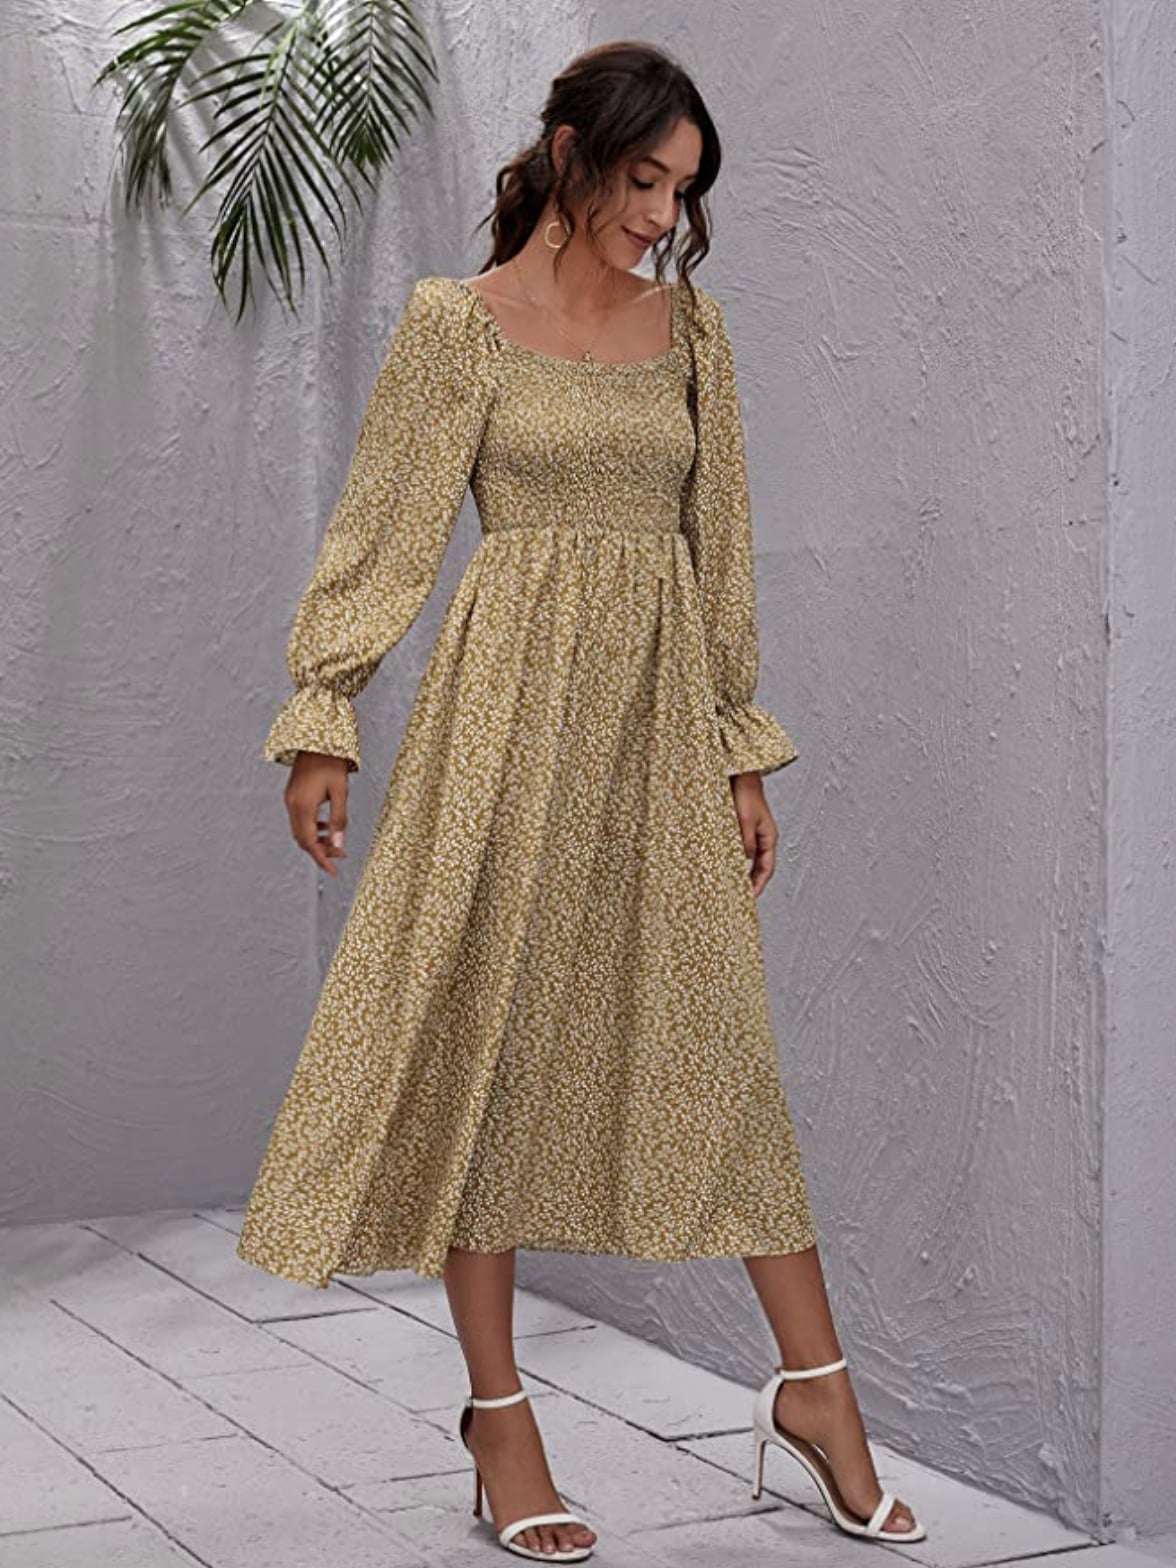 The 13 Best Long-Sleeved Dresses For Fall and Winter  Long sleeve dresses  fall, Long sleeve dress winter, High fashion street style